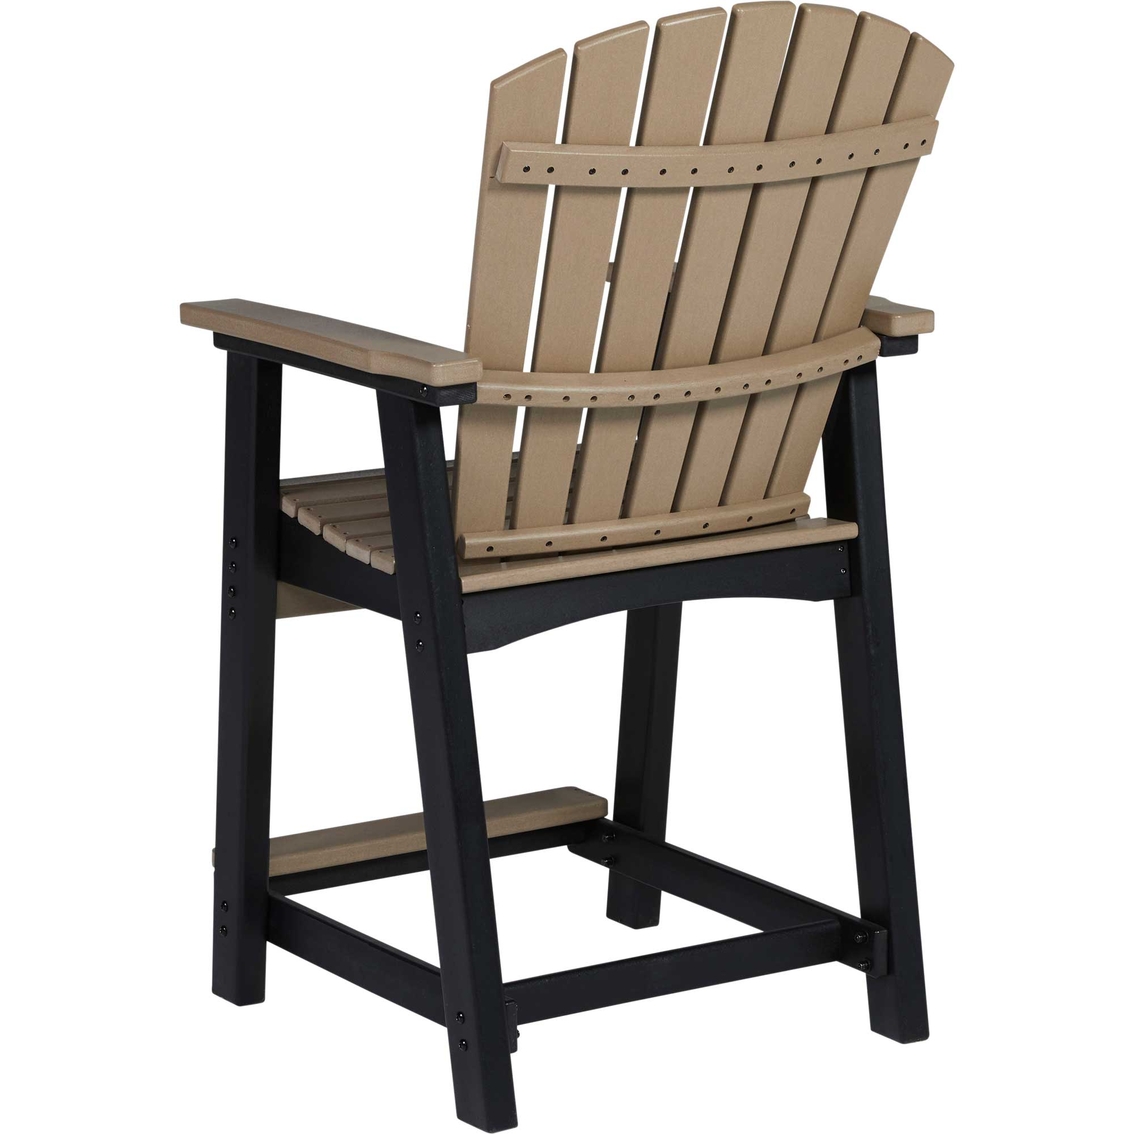 Signature Design by Ashley Fairen Trail Outdoor Counter Height Barstool 2 pk. - Image 4 of 7